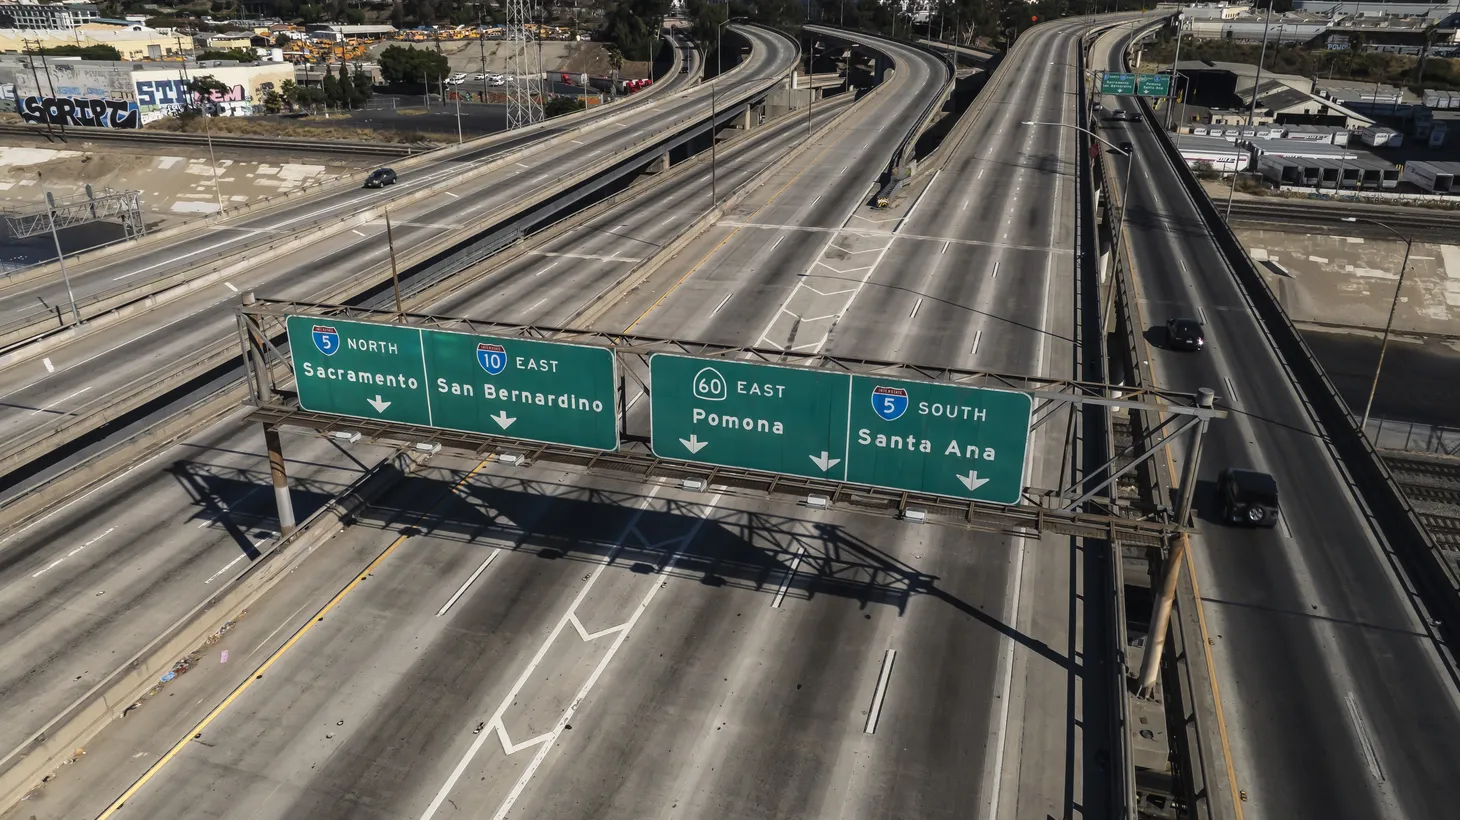 The Interstate 10 freeway in Downtown Los Angeles is closed in all directions due to a major fire that occurred beneath the freeway. CalTrans engineers are assessing the condition of the damage and how to handle repairs. The freeway will remain closed indefinitely for now. November 12, 2023.